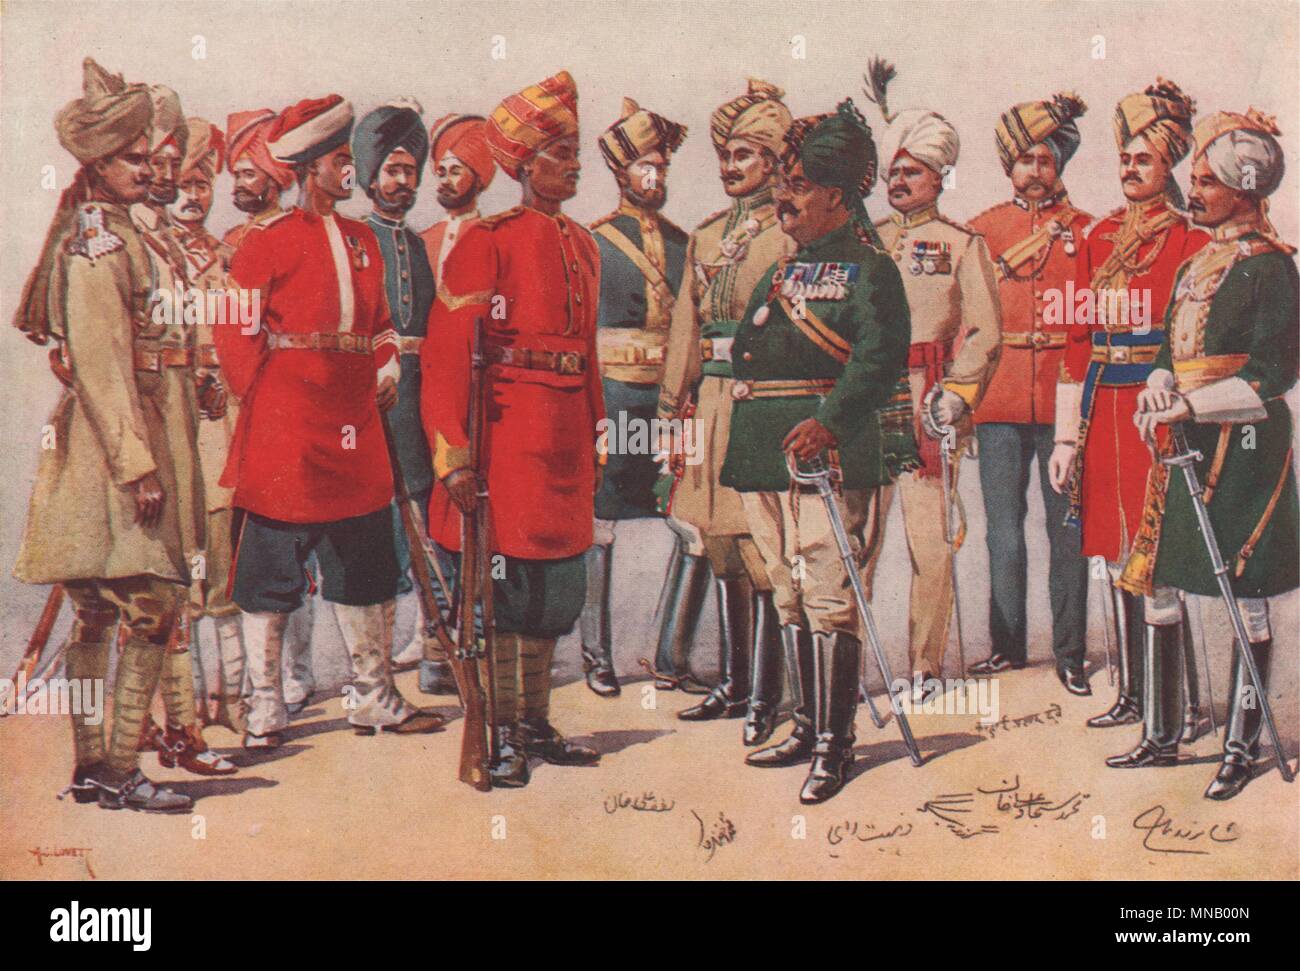 'A group of Indian soldiers' by A.C. Lovett. India 1913 antique print Stock Photo